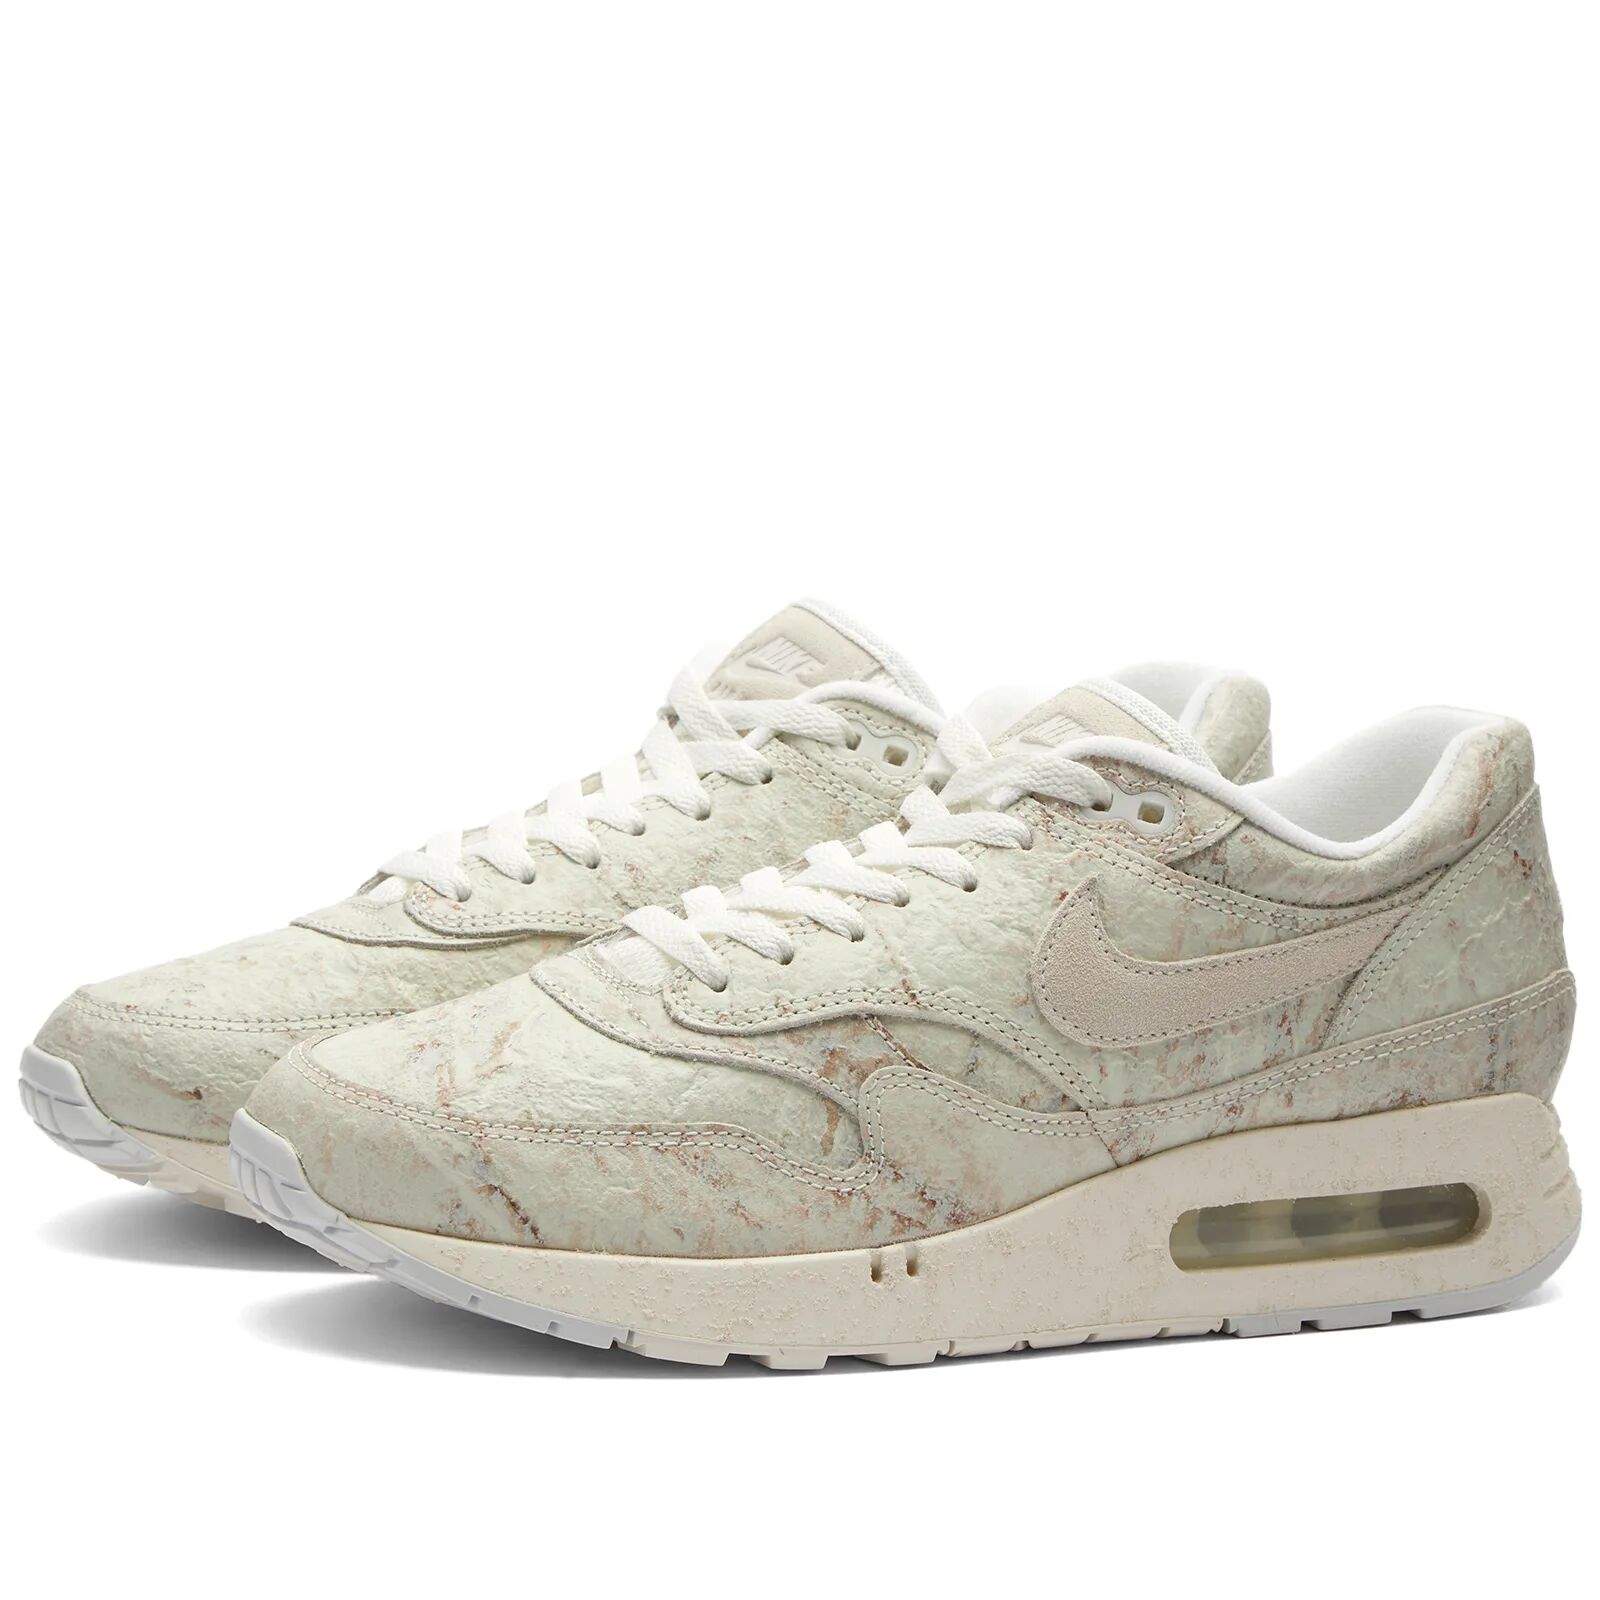 Nike Air Max 1 '86 OG Sneakers in Summit White/Photon Dust/Black, Size UK 14